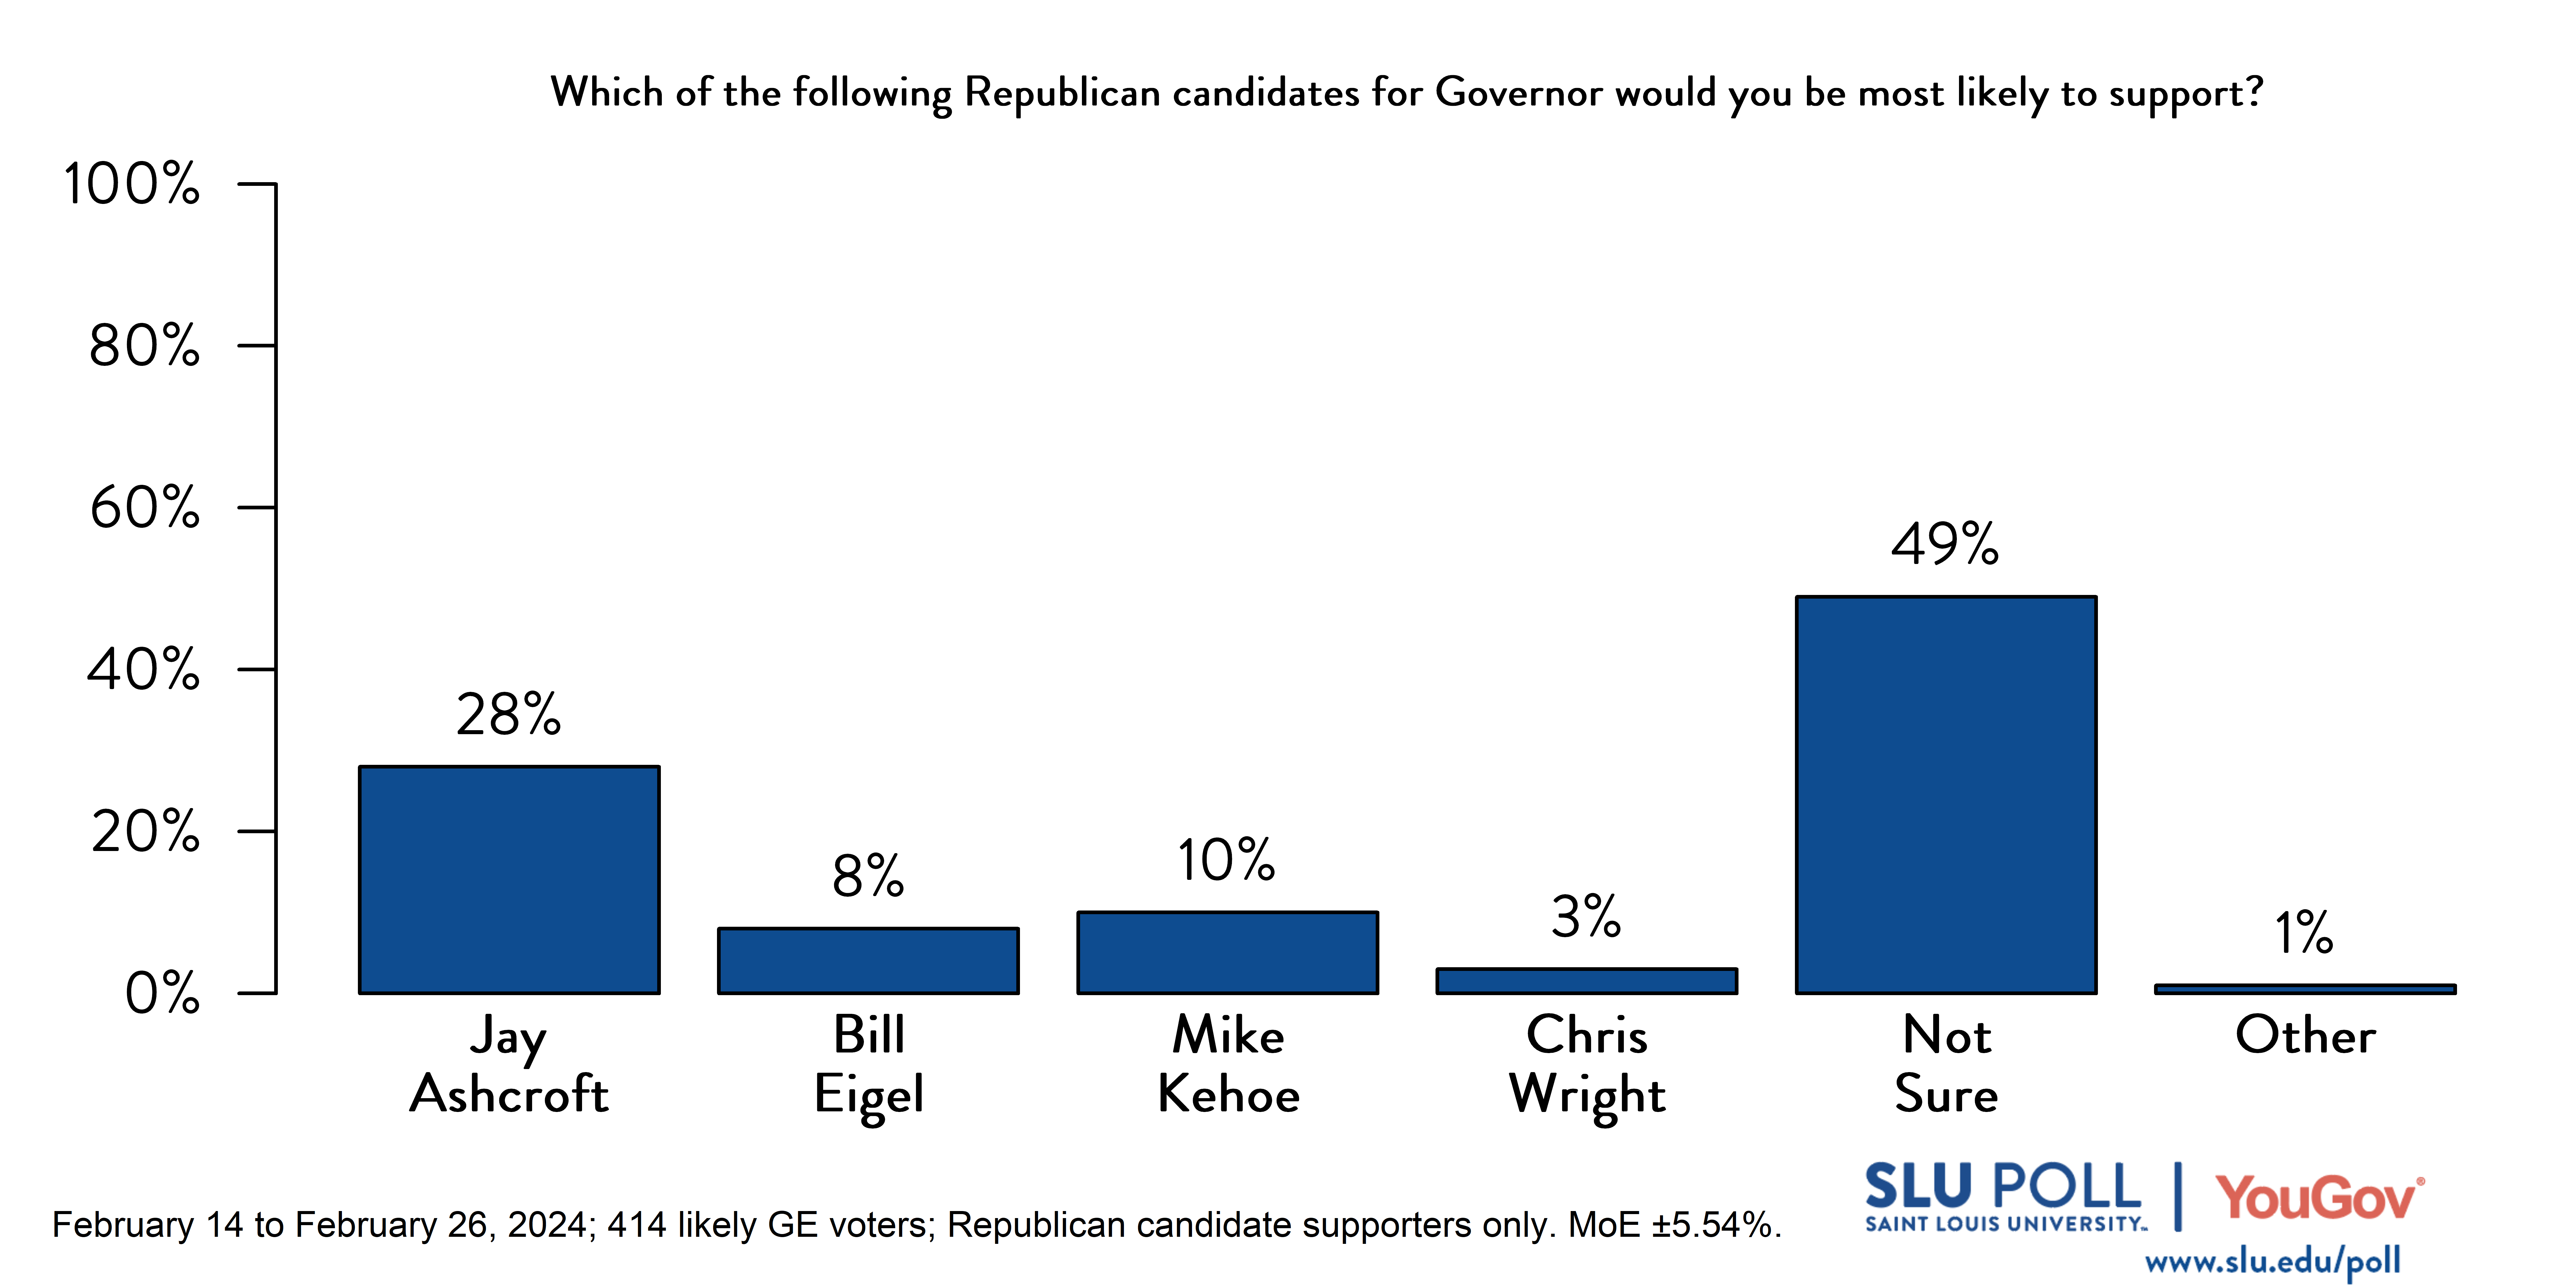 Bar graph showing poll results for Republican candidates for governor. Jay Ashcroft, 28%; Bill Eigel, 8%; Mike Kehoe, 10%; Chris Wright, 3%; Not Sure, 49%; Other, 1%.